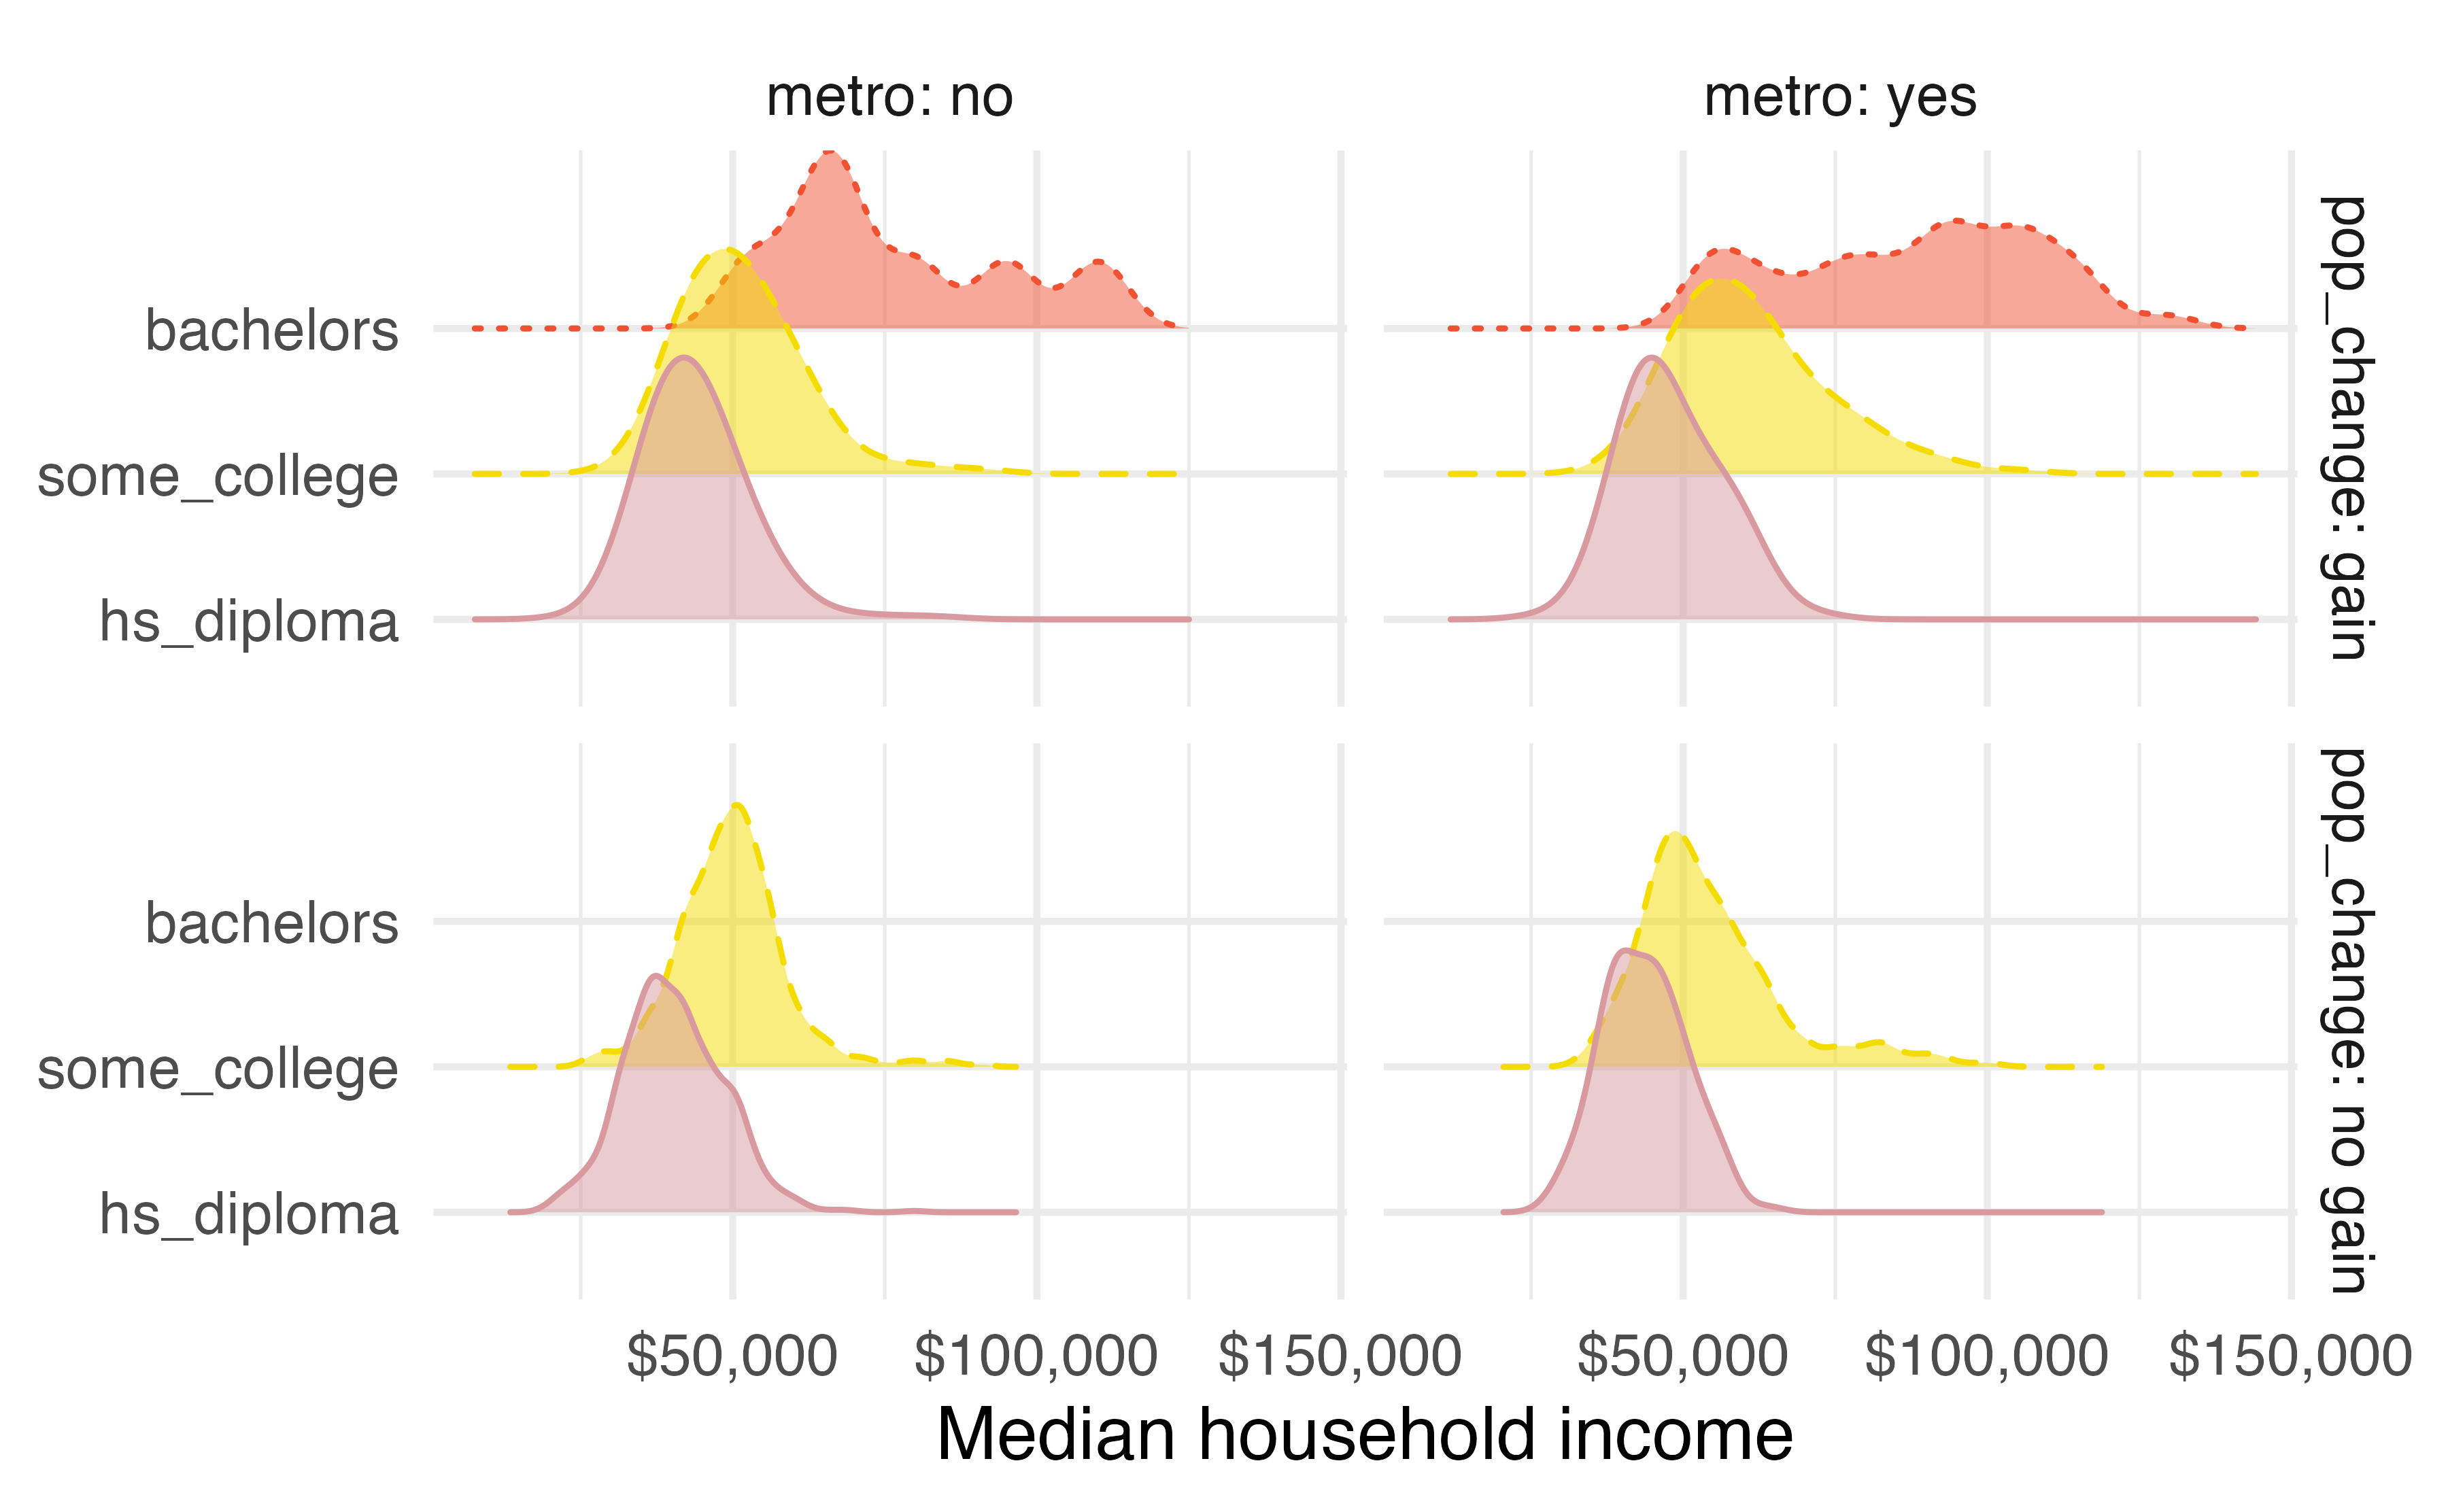 Distribution of median income in counties using a ridge plot, faceted by whether the county had a population gain or not as well as whether the county is in a metropolitan area and colored by the median education level in the county. Those counties where the median education level is a bachelor's degree have household income distributions that are substantially higher than counties with some college or high school degree only as their education level.